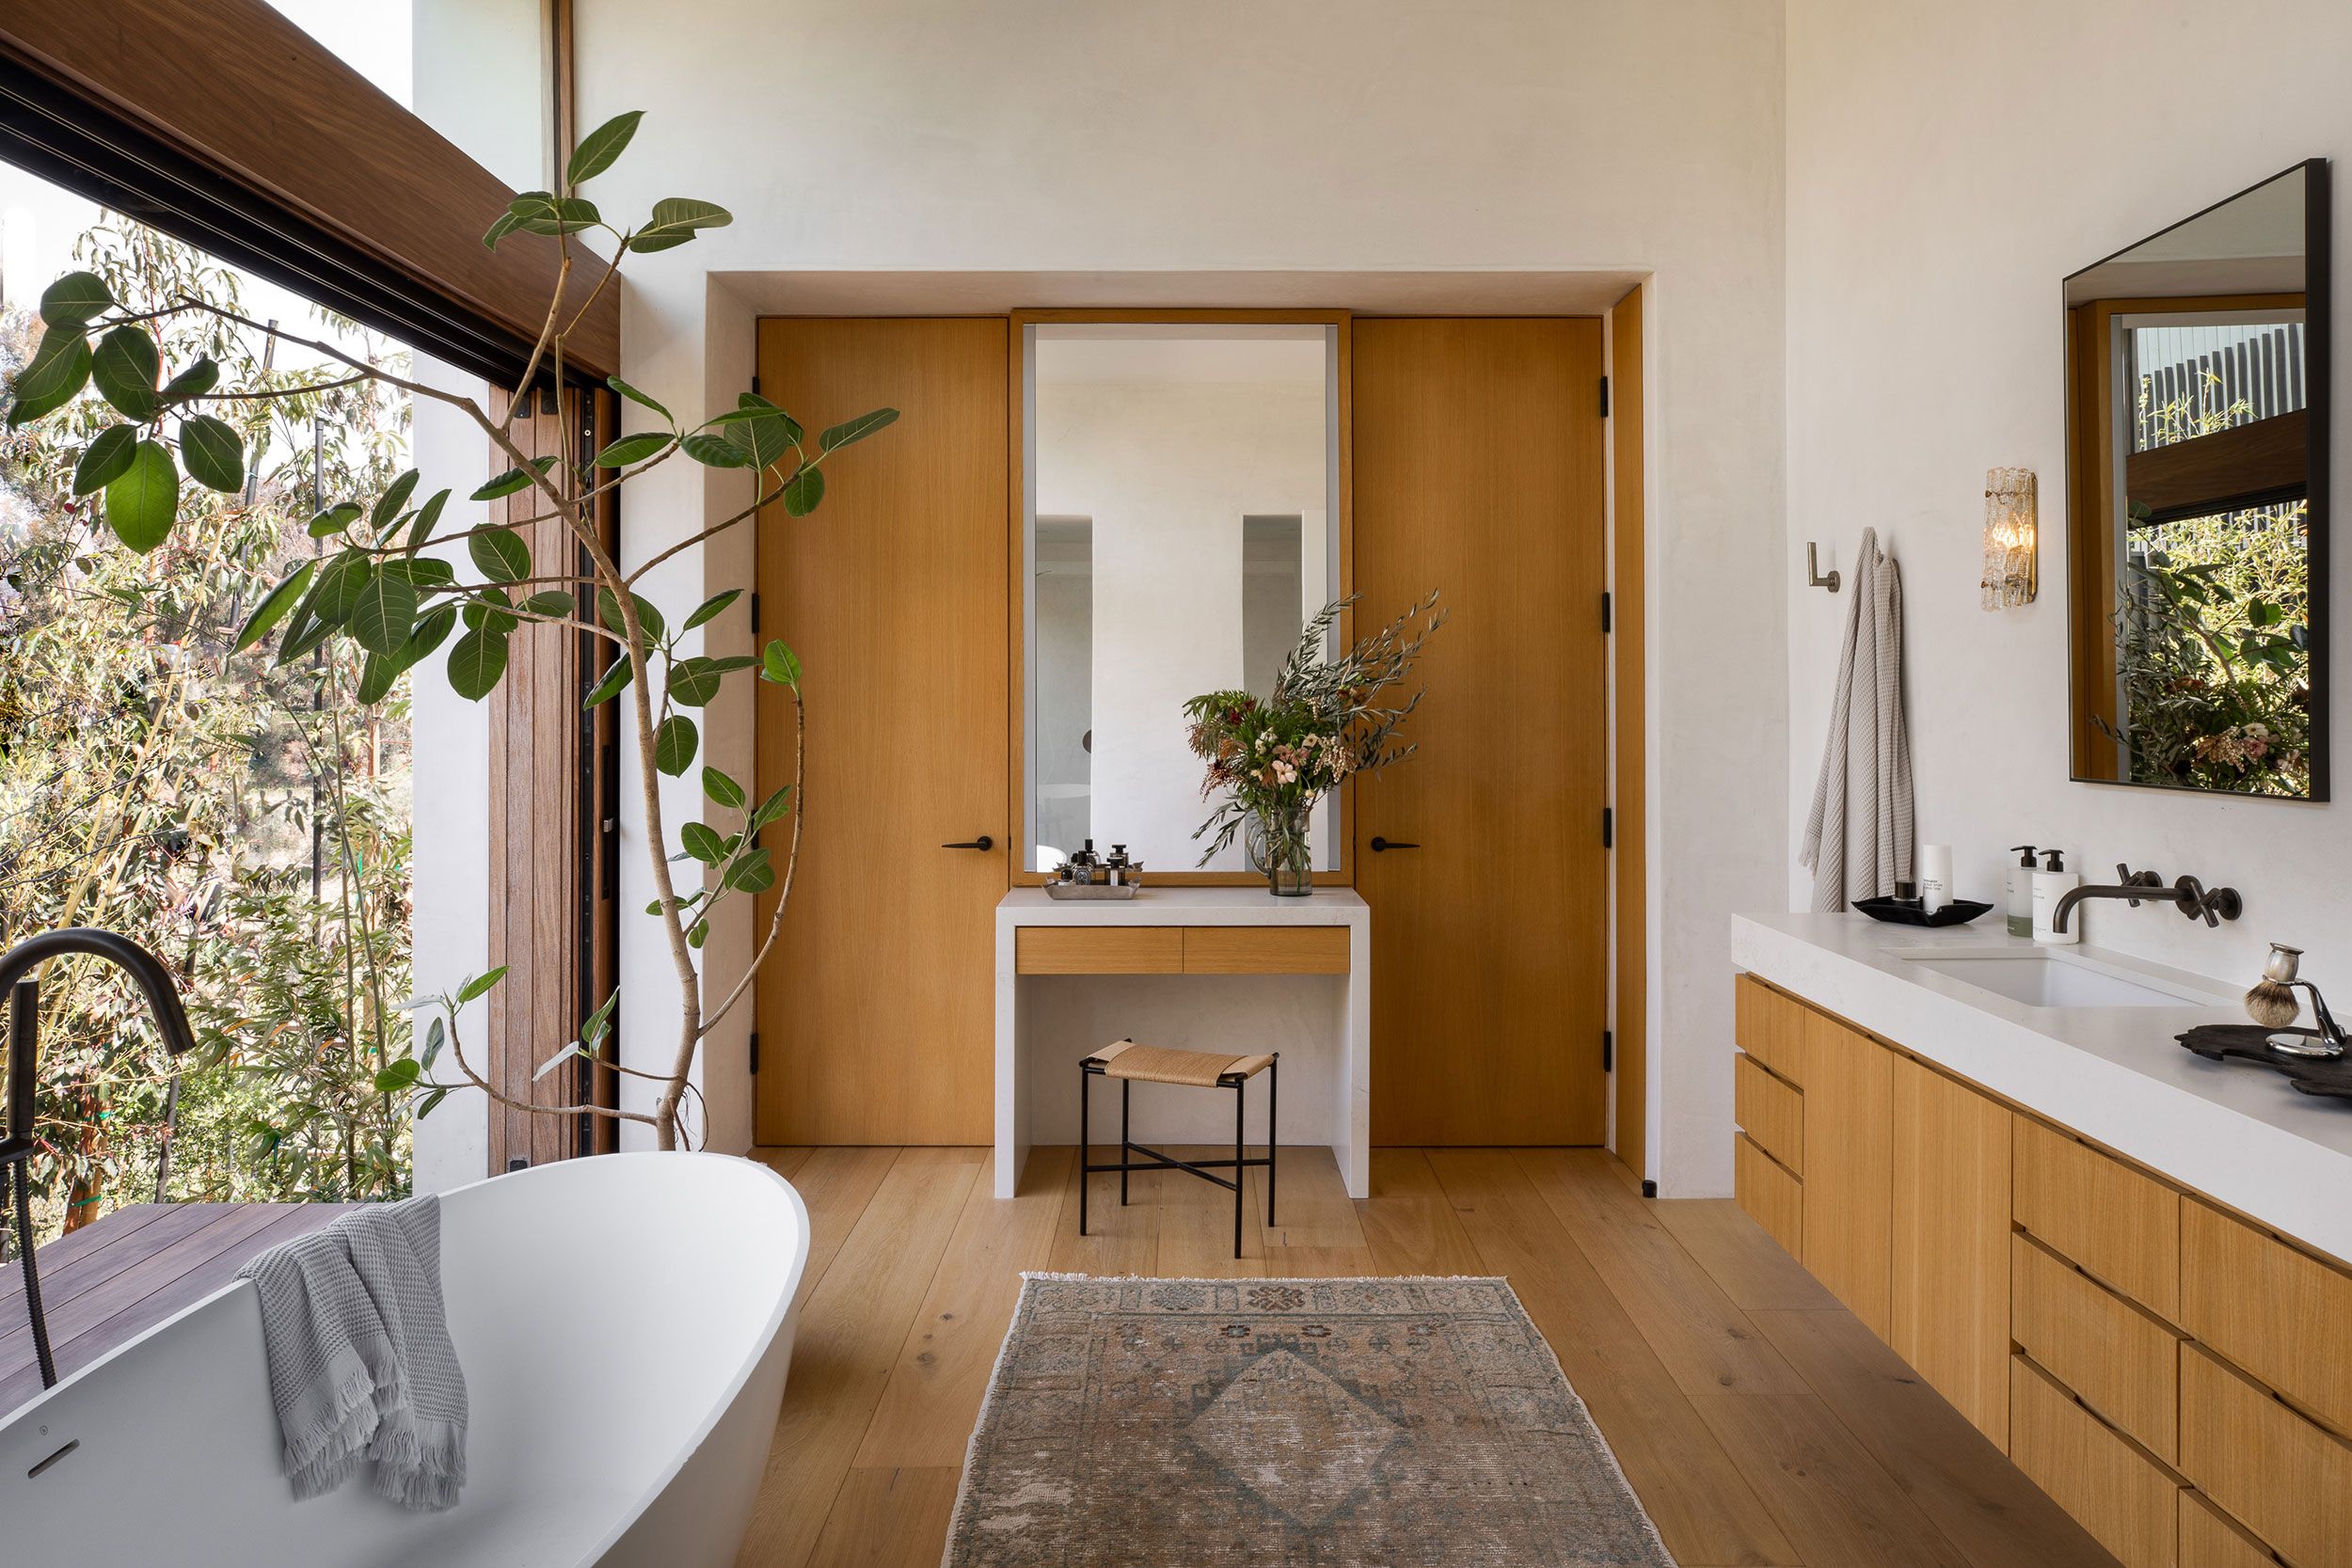 How do people make bathrooms sustainable and environmentally friendly?